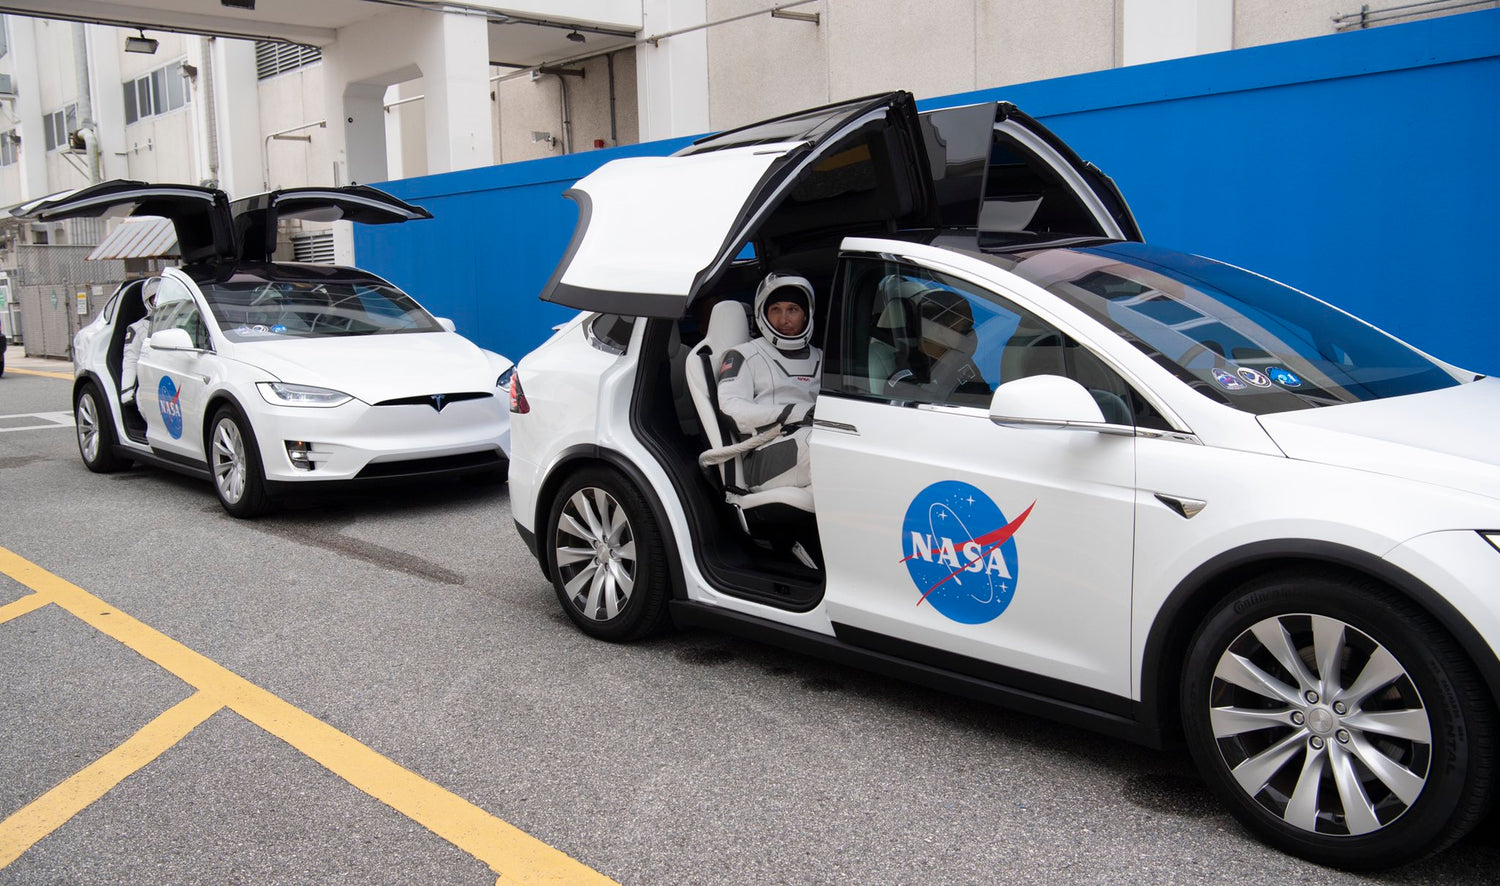 Tesla Doesn't Pay to Advertise Because it Doesn't Need to, Model X Escorts SpaceX Astronauts Readying for 11/15 Launch